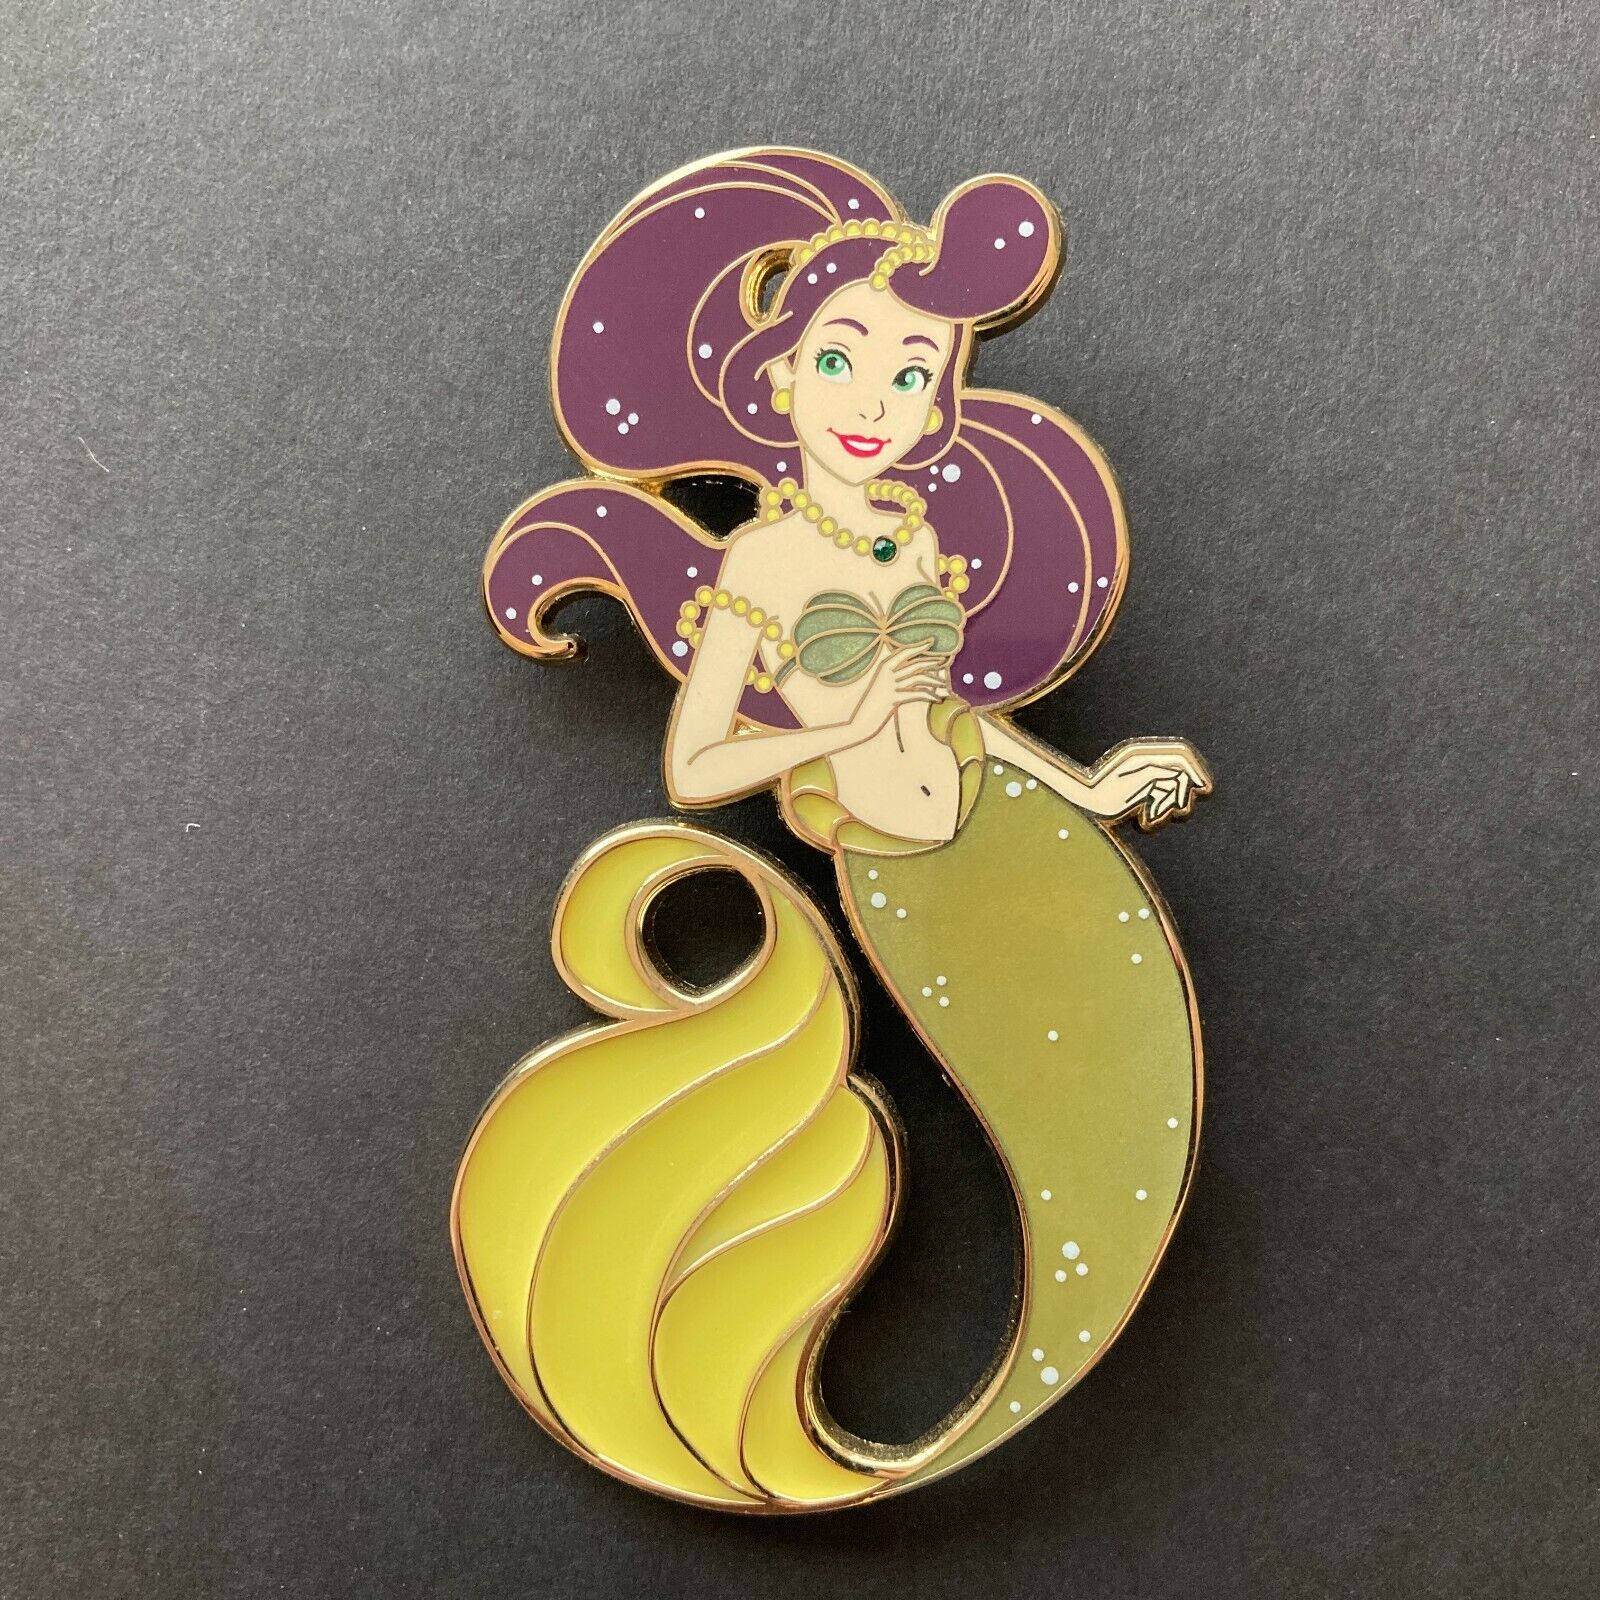 Belle from Beauty and the Beast - Designer Mermaids - LE 75 FANTASY Disney Pin 0